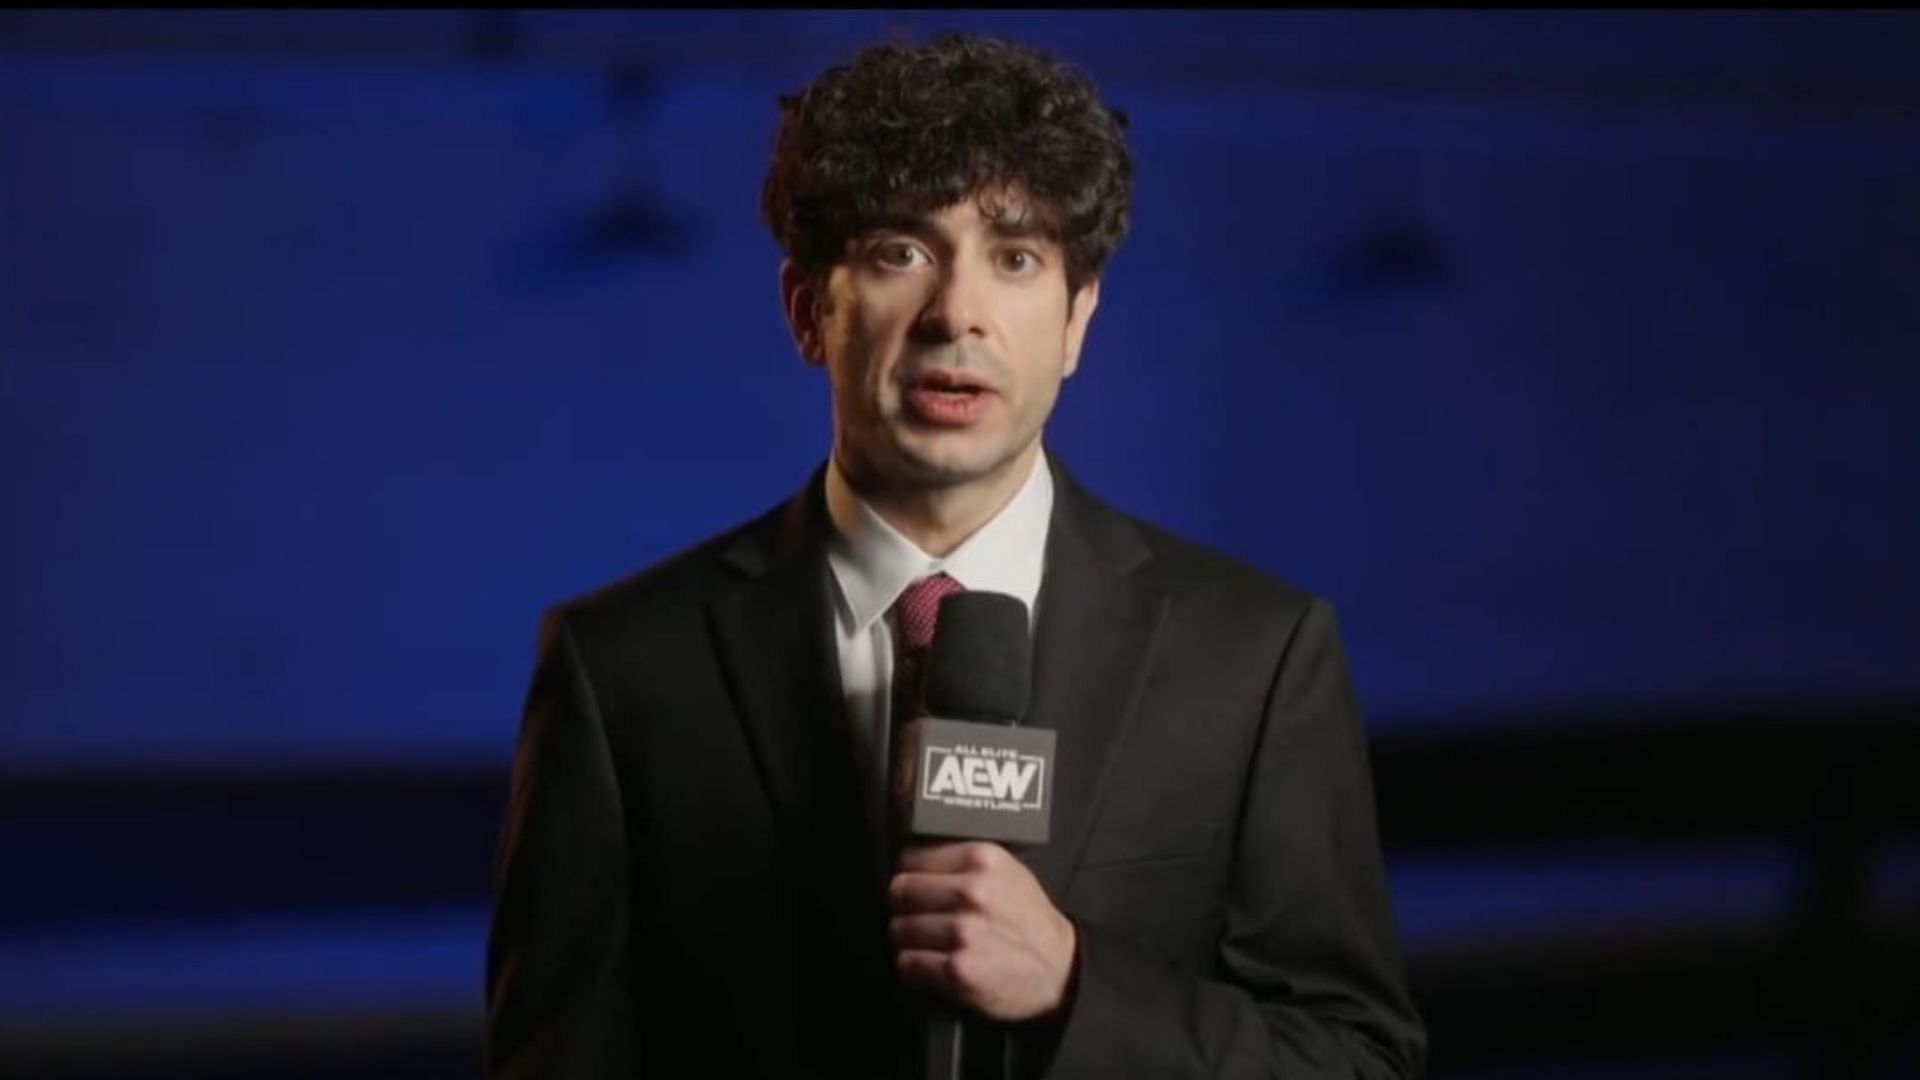 Tony Khan is the most powerful person in AEW.